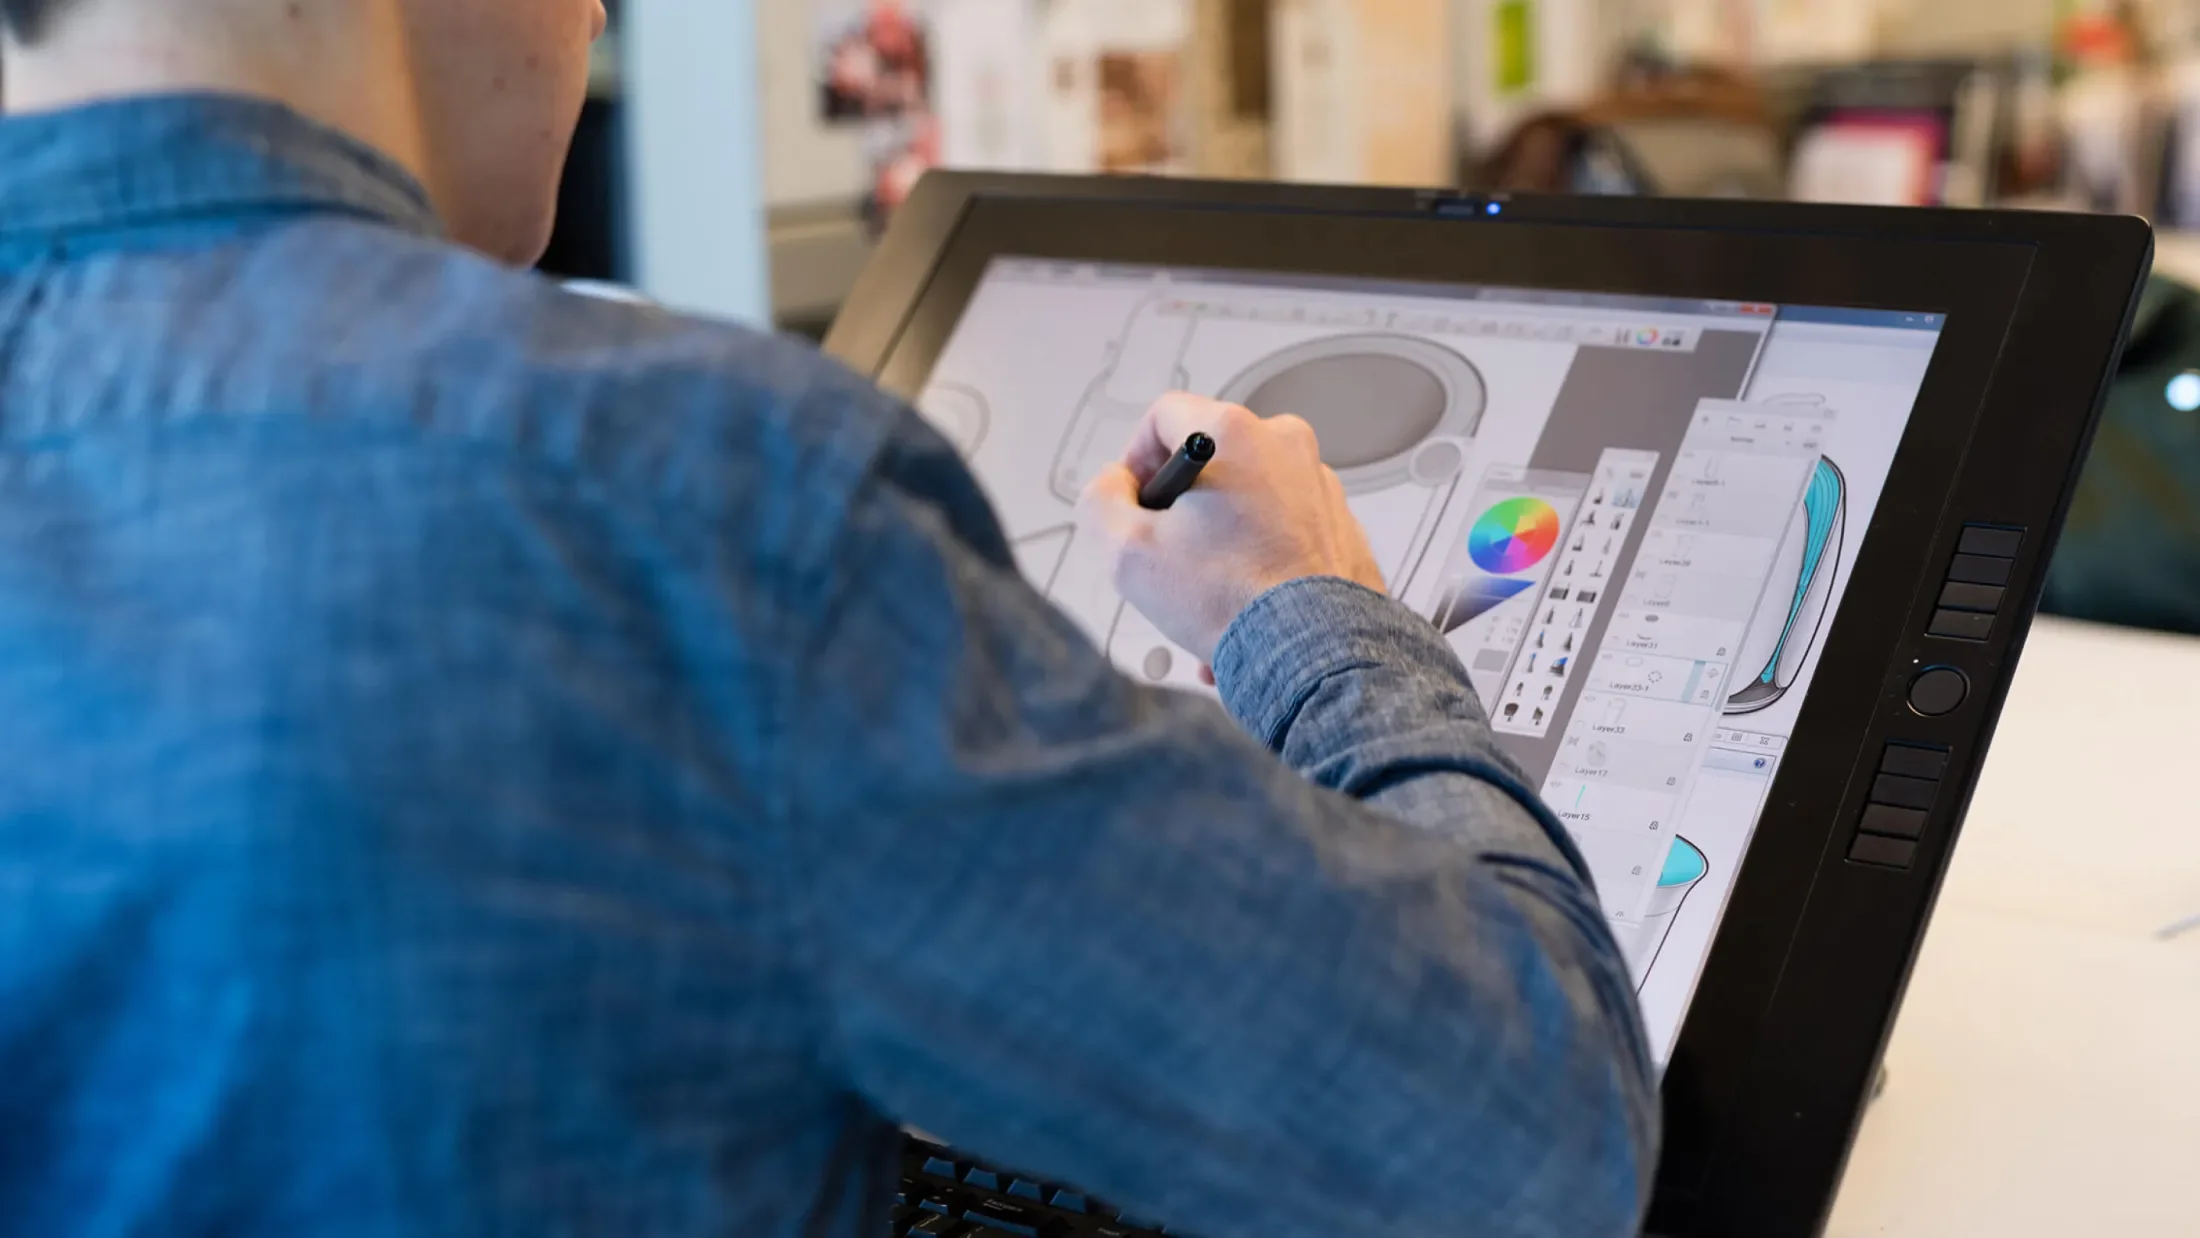 A person drawing on a graphics tablet